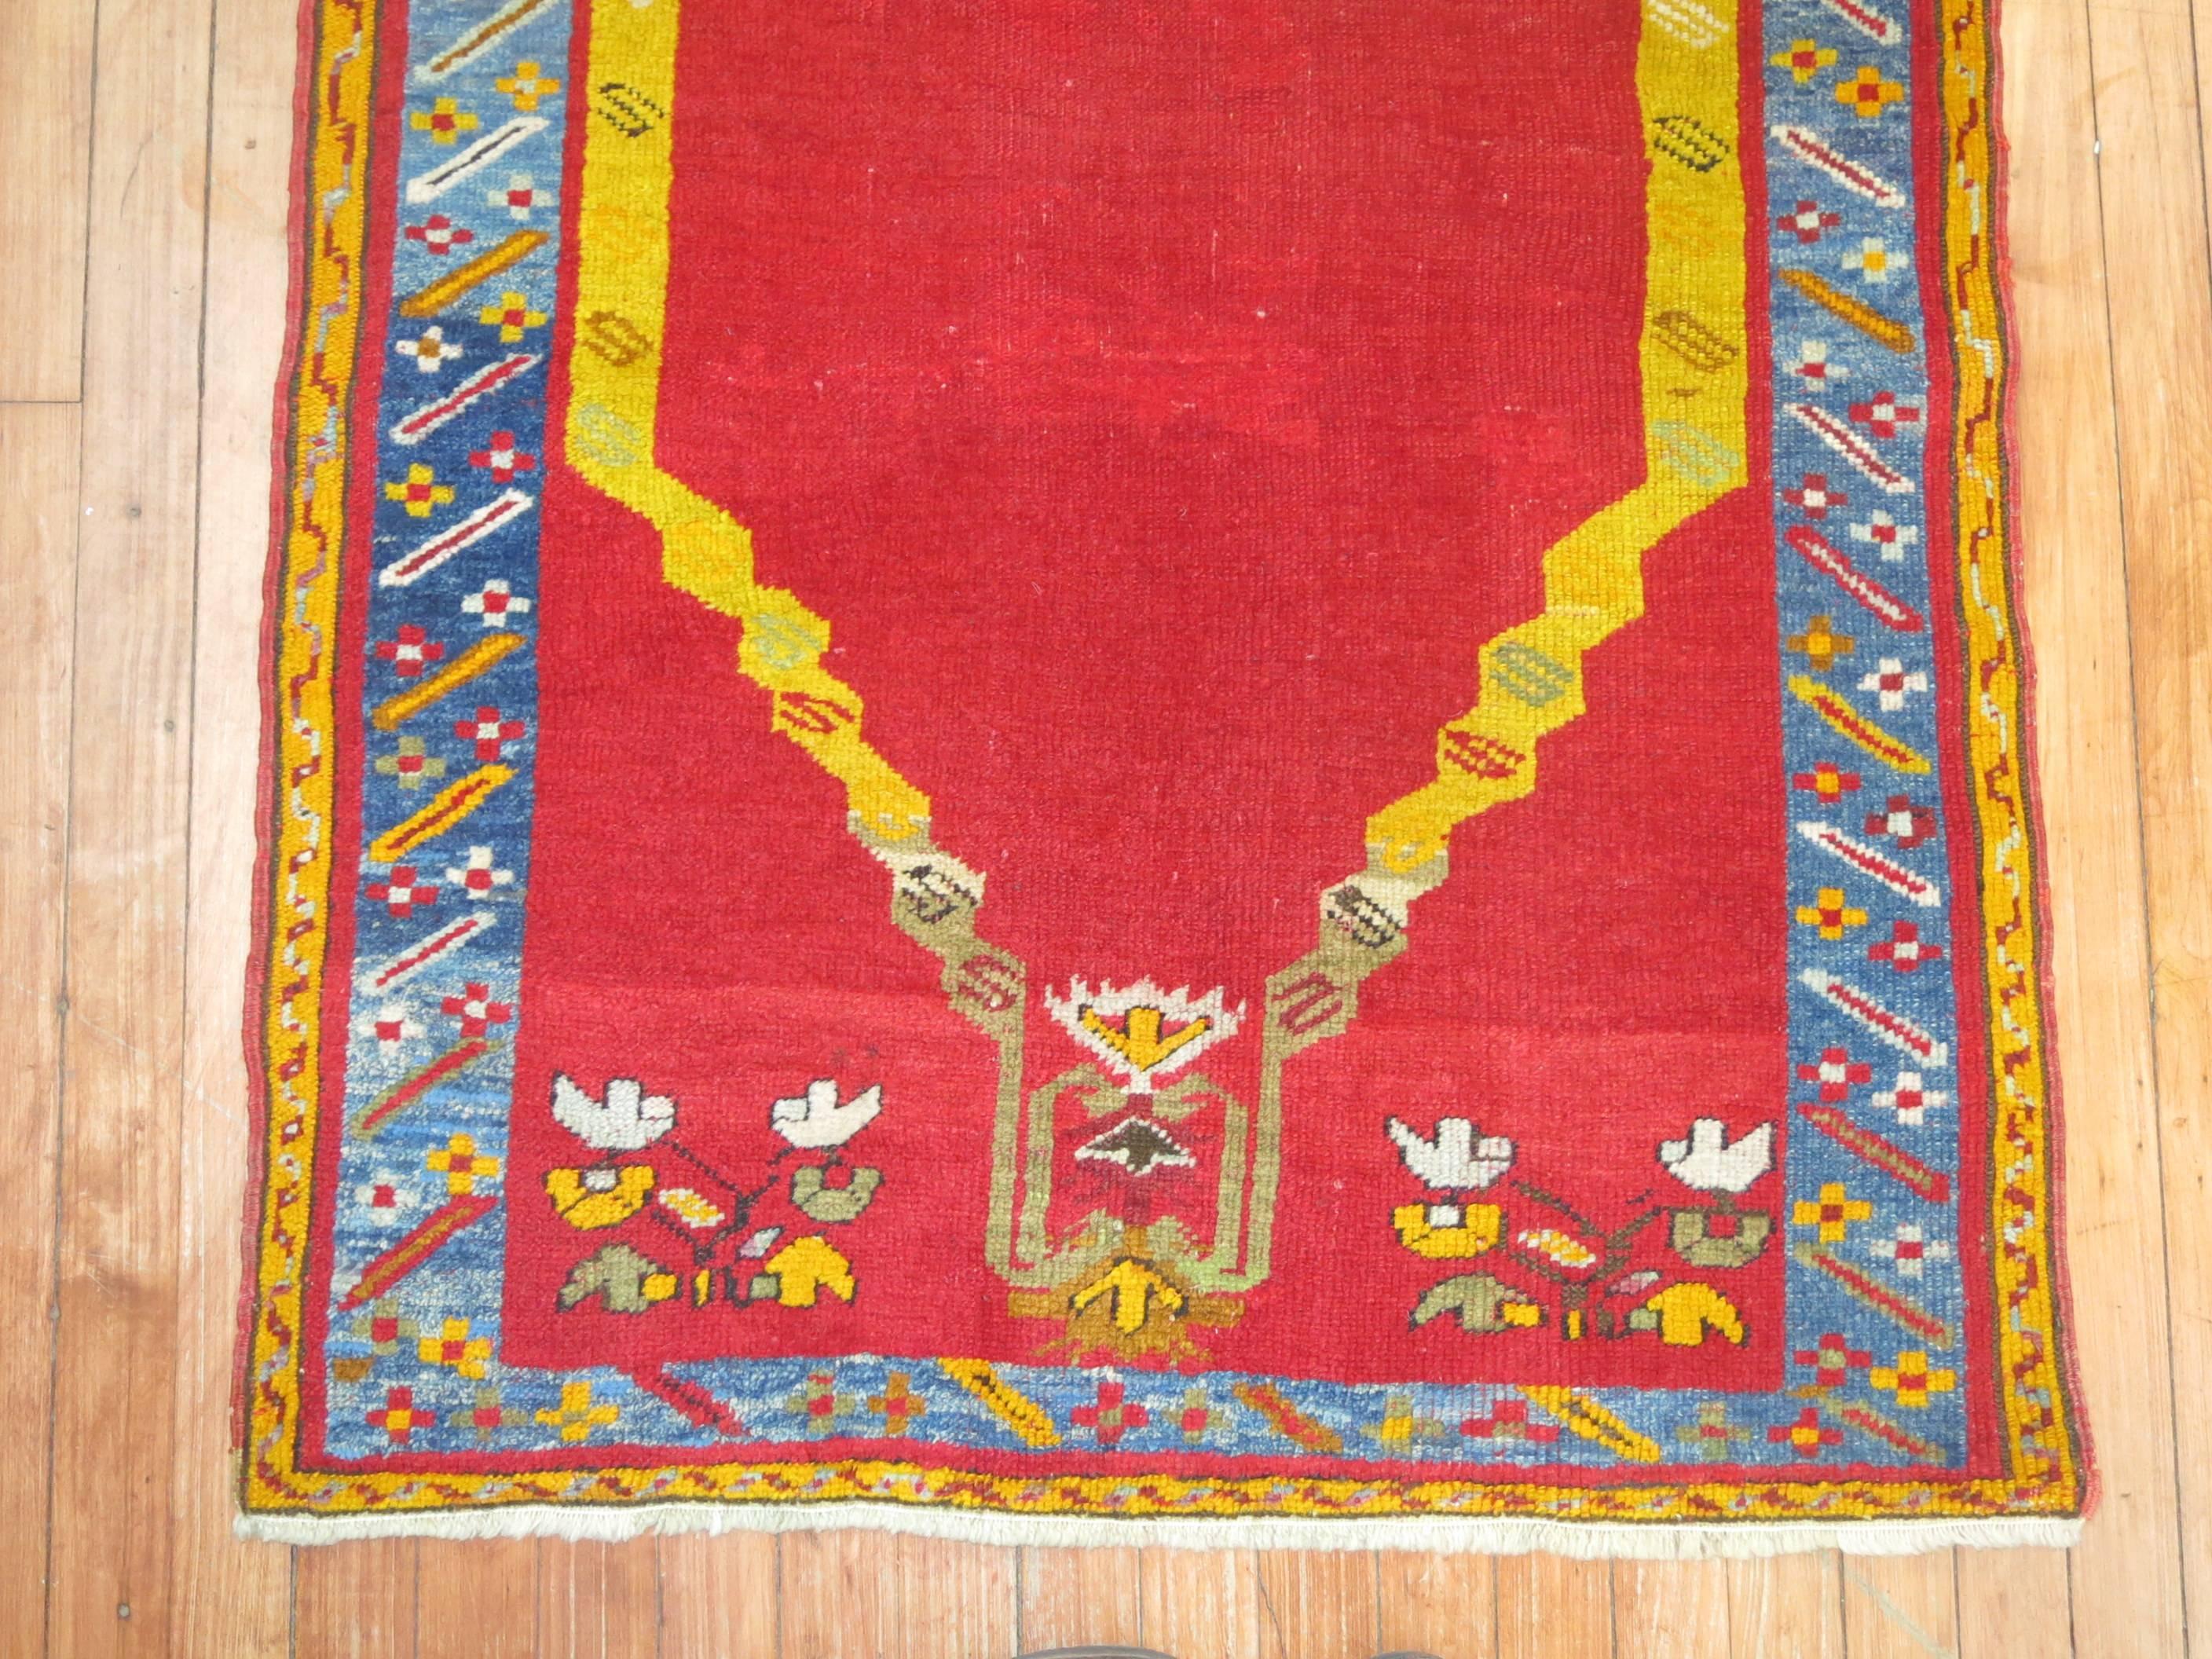 A colorful early 20th century Turkish Melas rug with a Directional prayer motif.